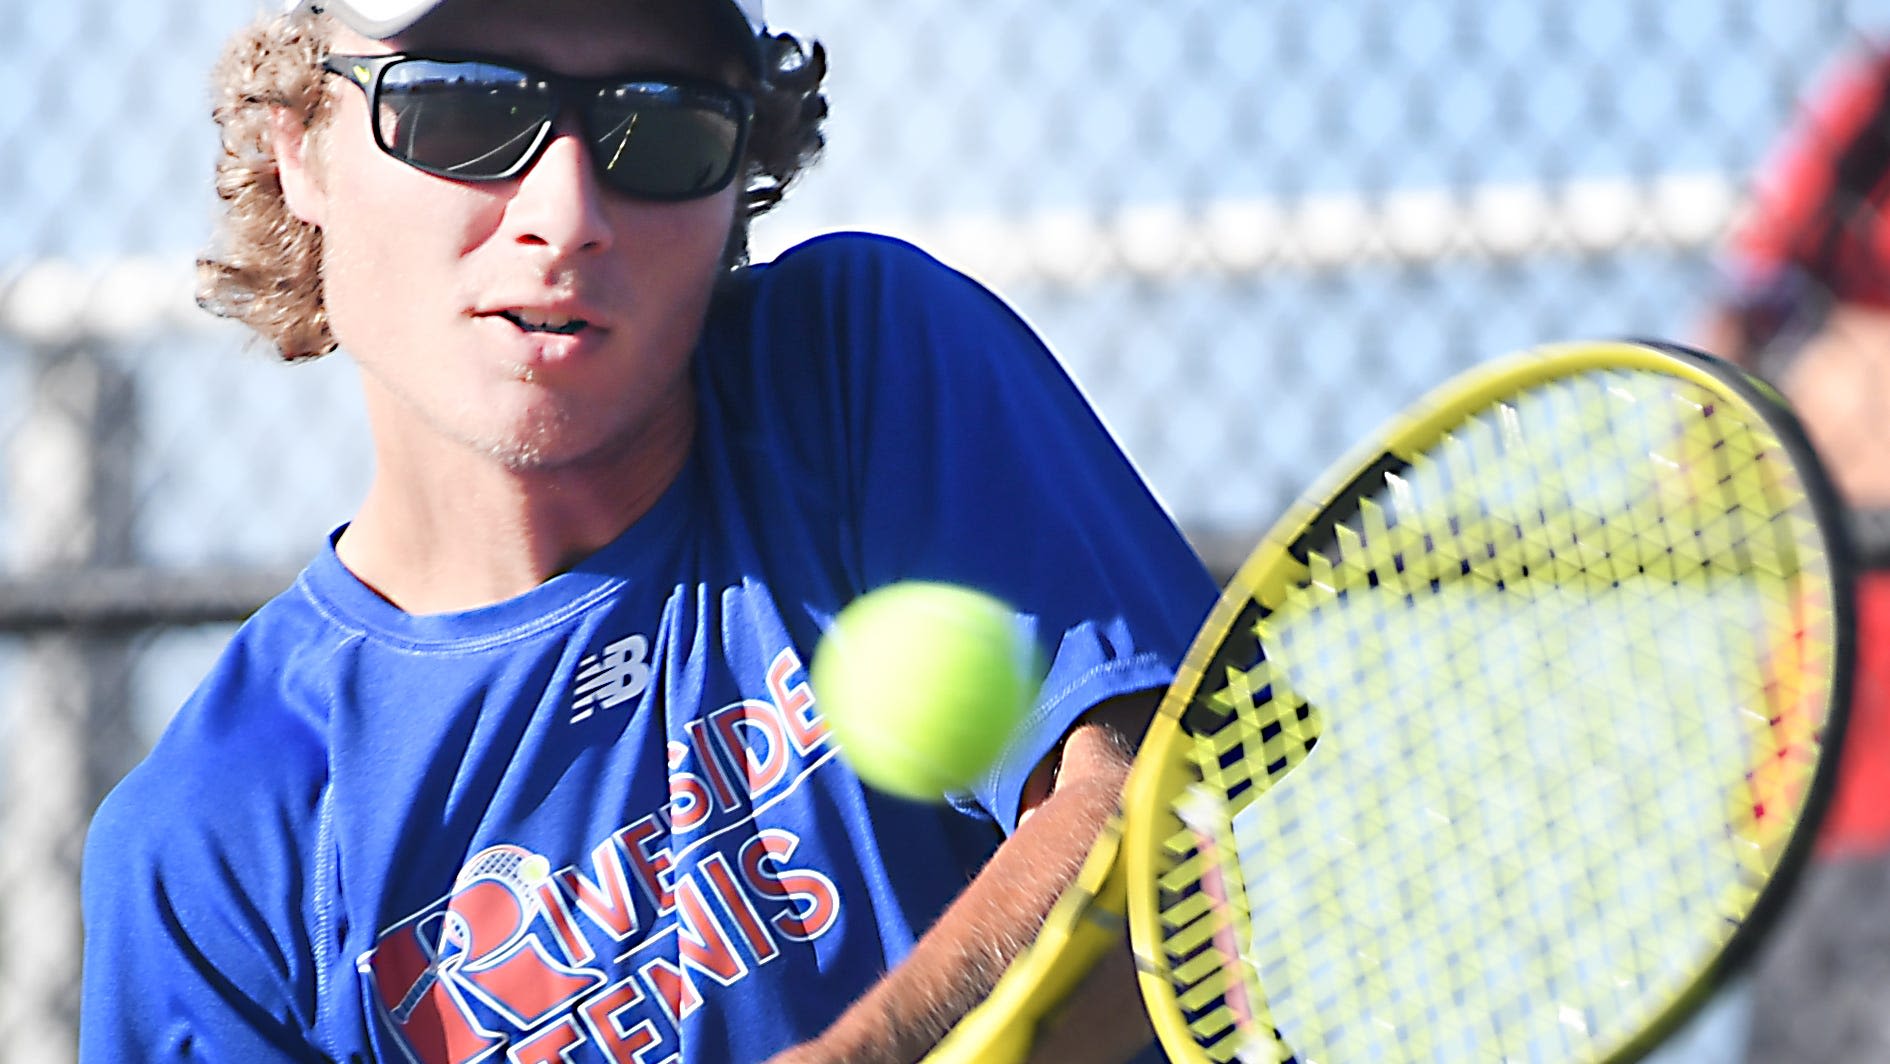 Riverside boys tennis, closing in on state title, postponed by weather